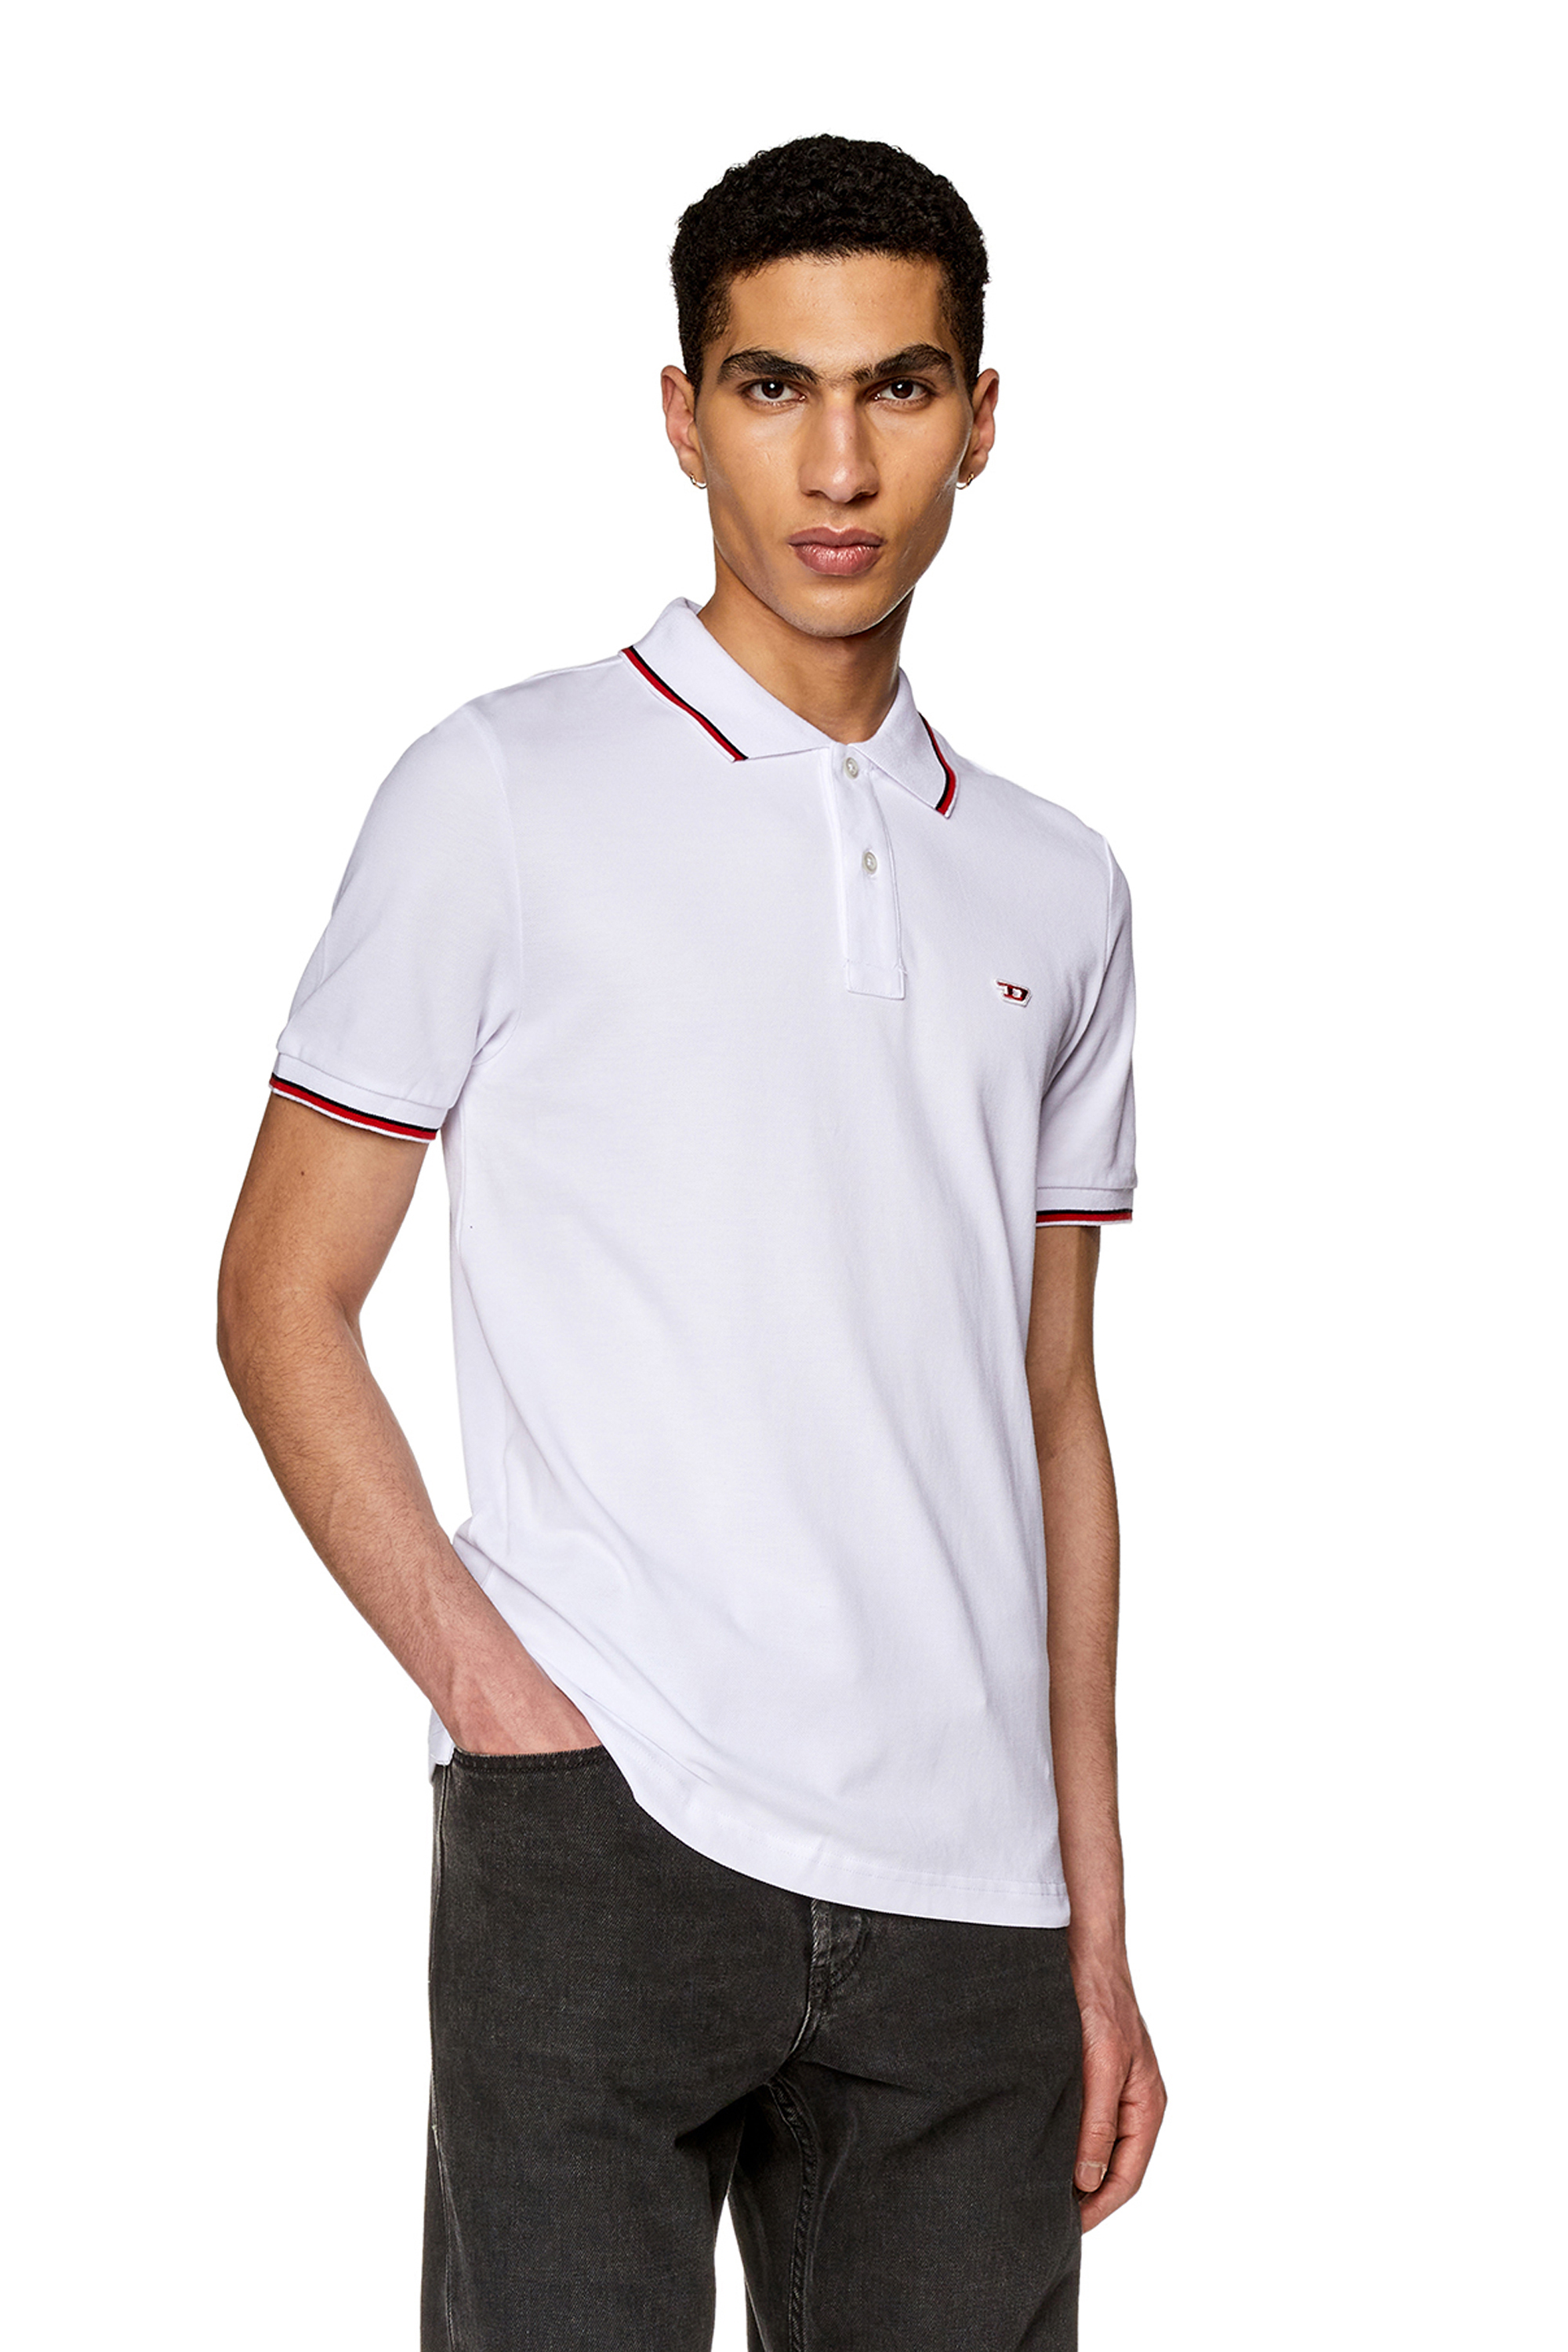 Diesel - Polo avec finitions rayées - Polos - Homme - Blanc